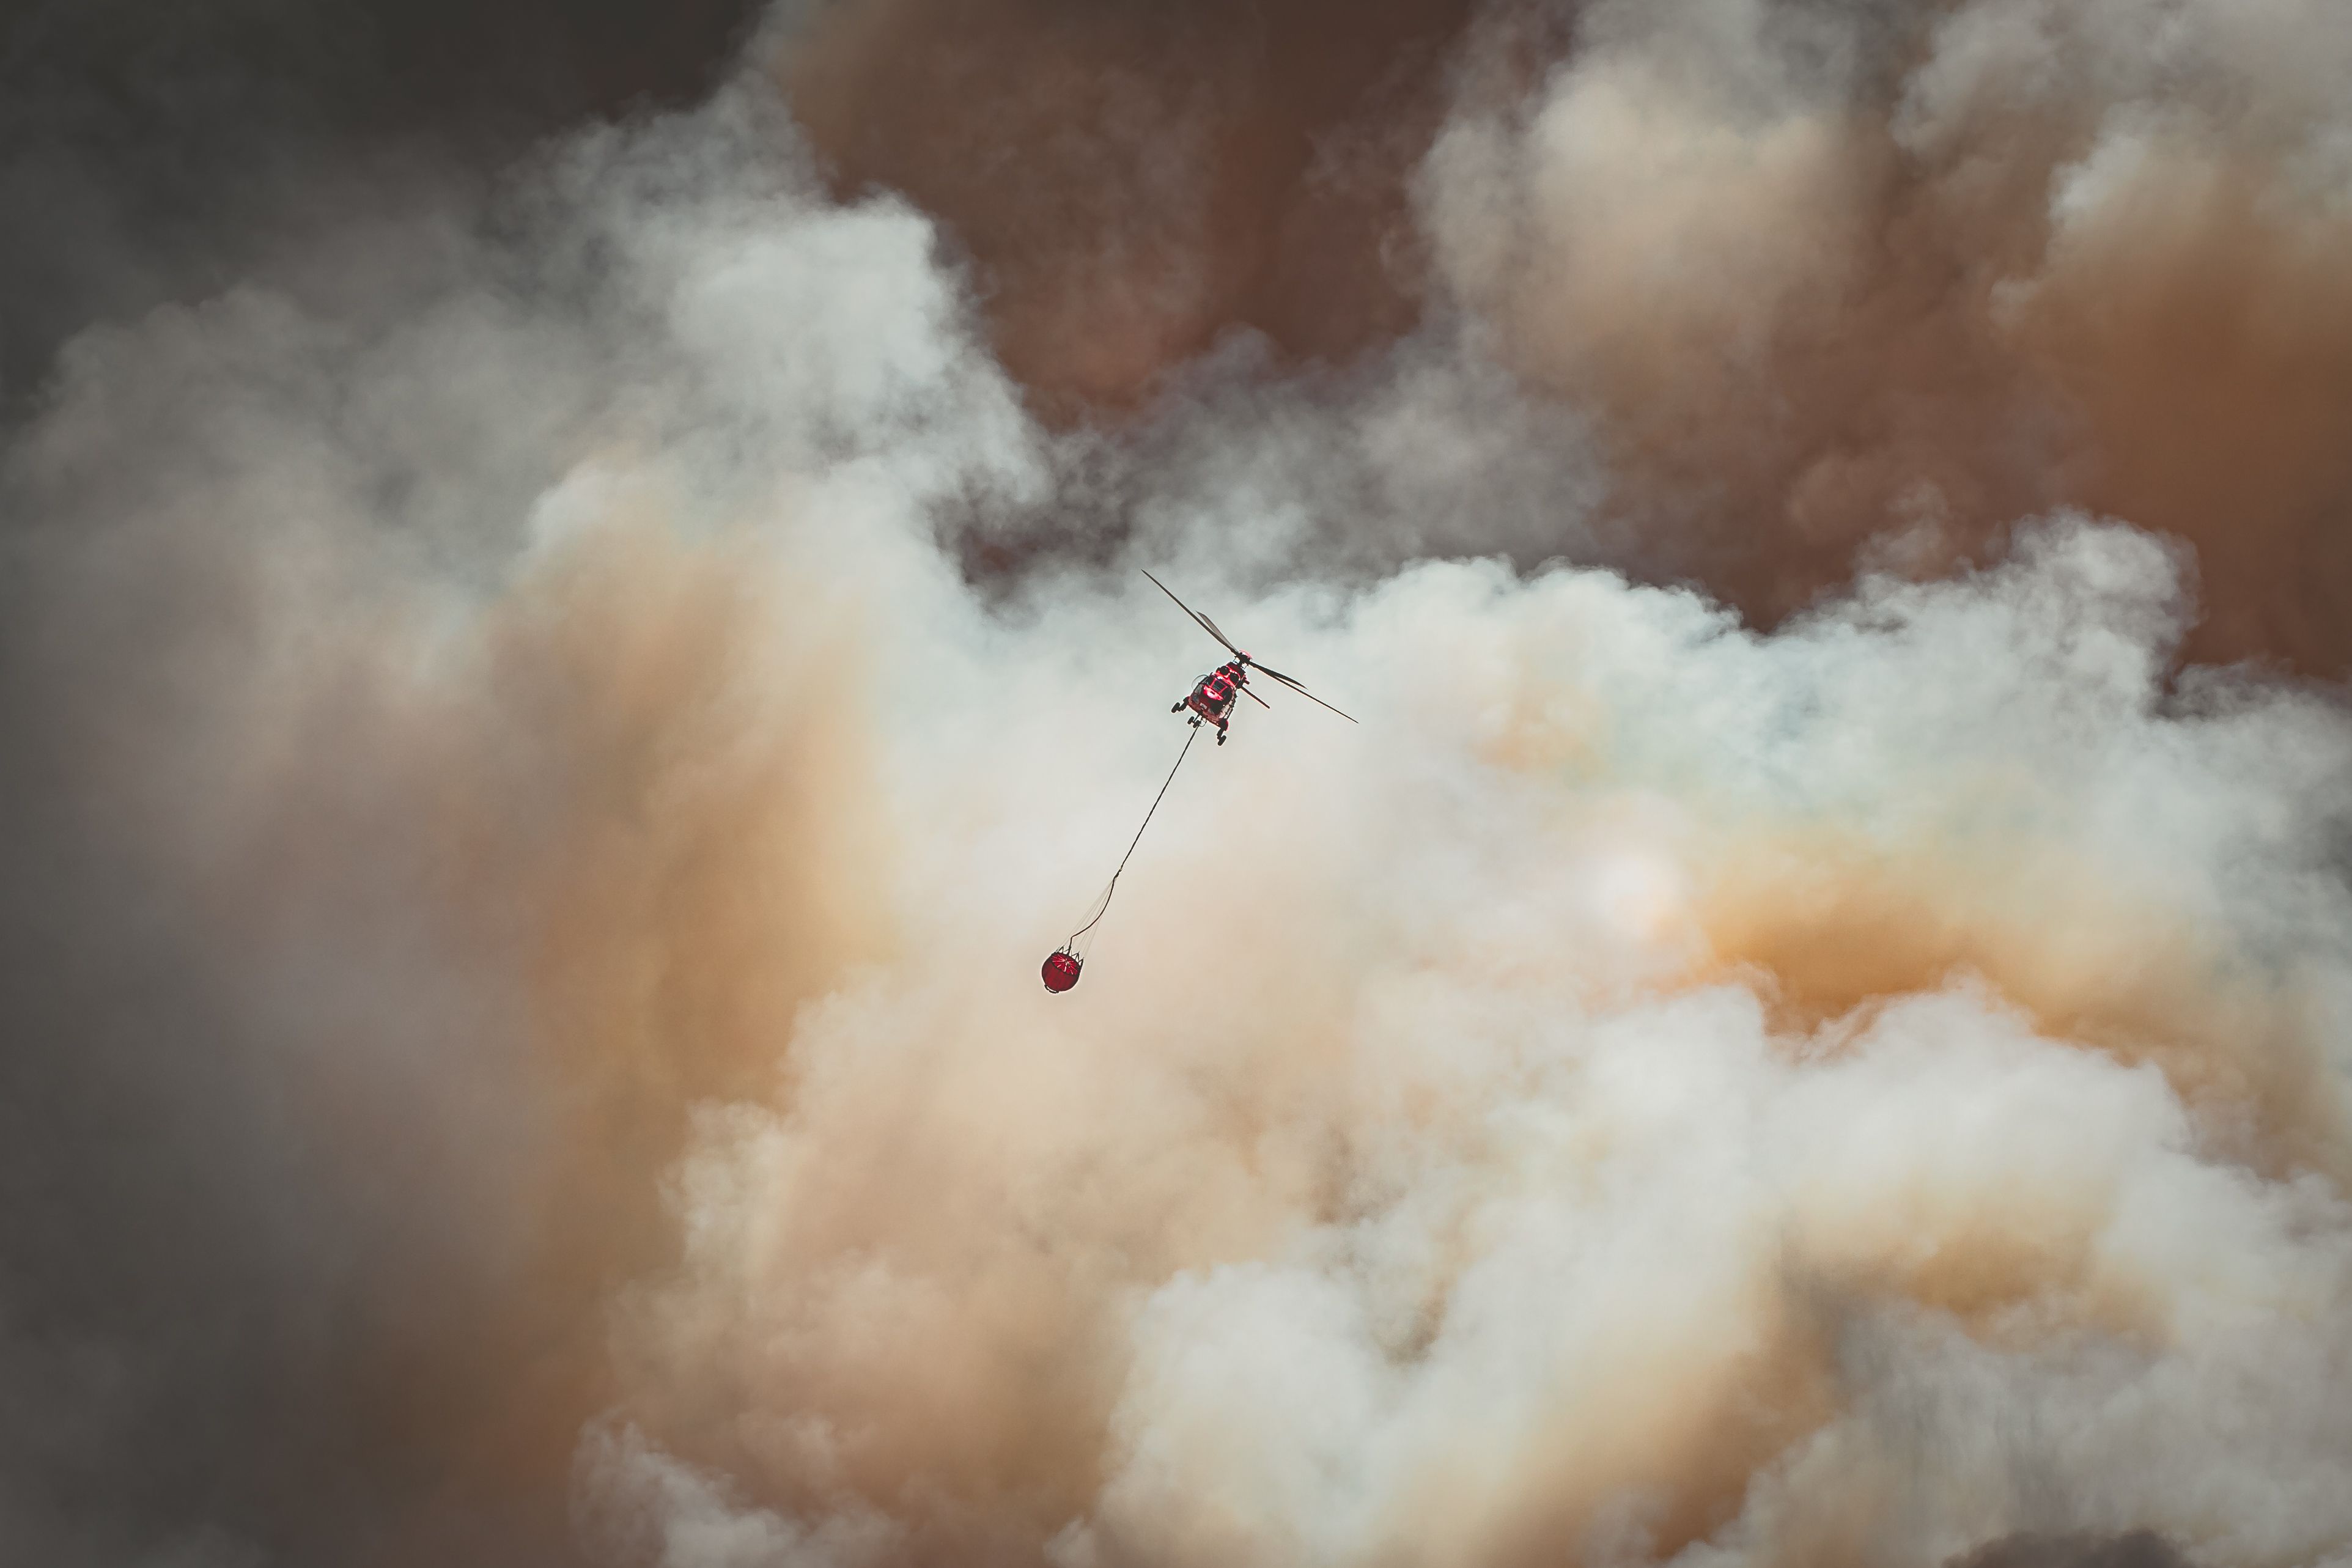 Heli Austria Gmbh Aerial Firefighting Europe 2021 Global Gathering Of Aerial Firefighting Experts